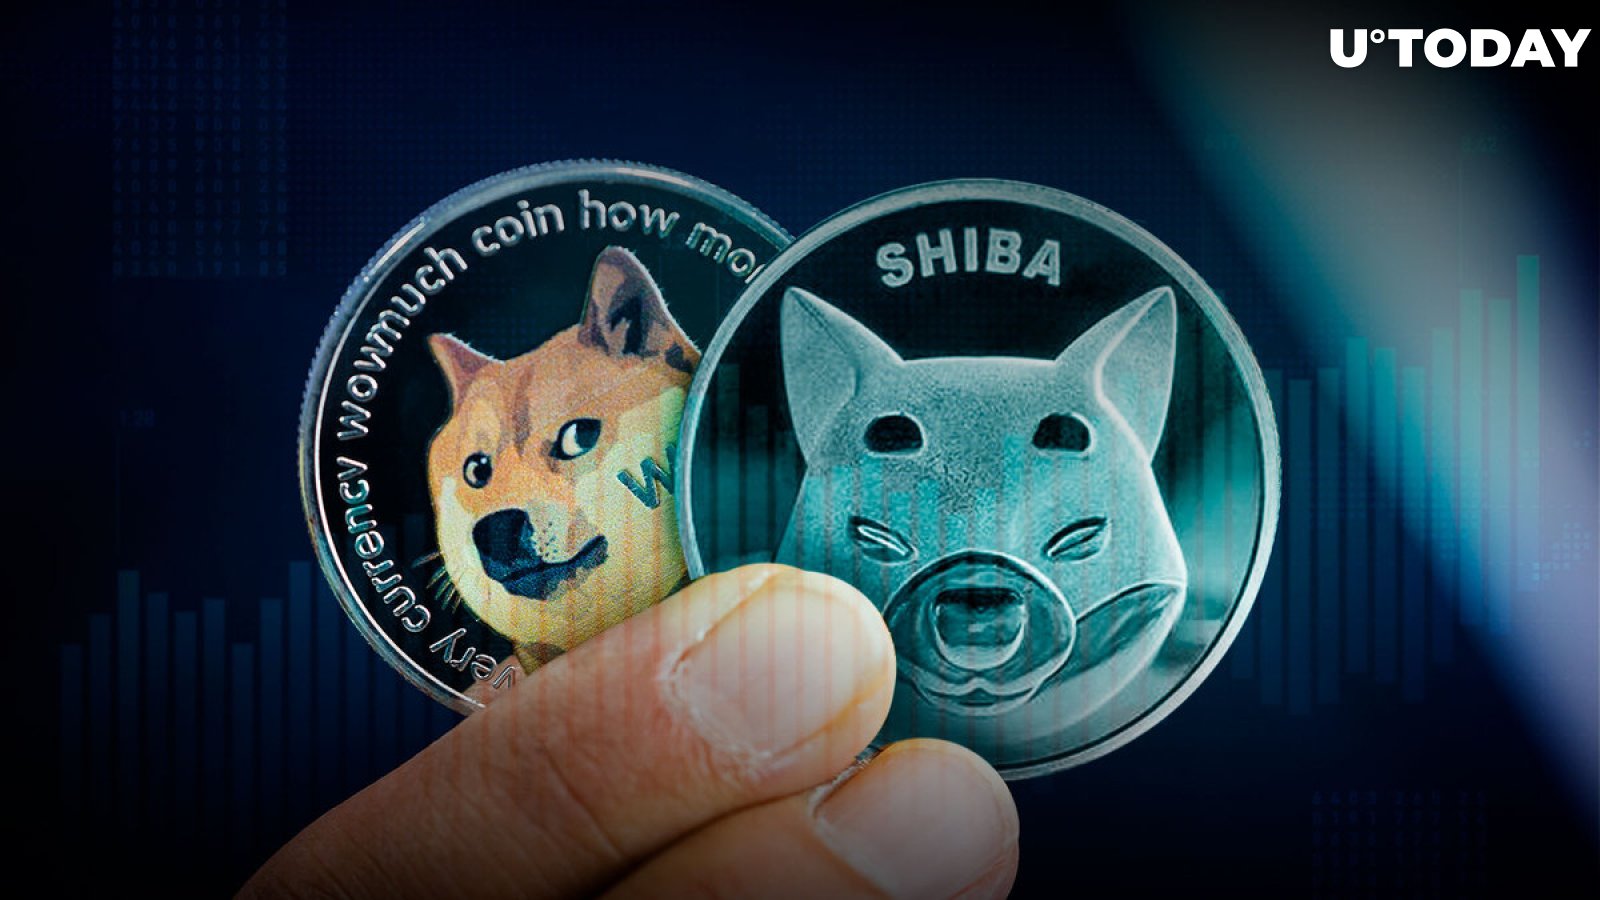 Shiba Inu, Dogecoin Post Gains as Meme Cryptocurrencies' Trading Volumes Spike 151%